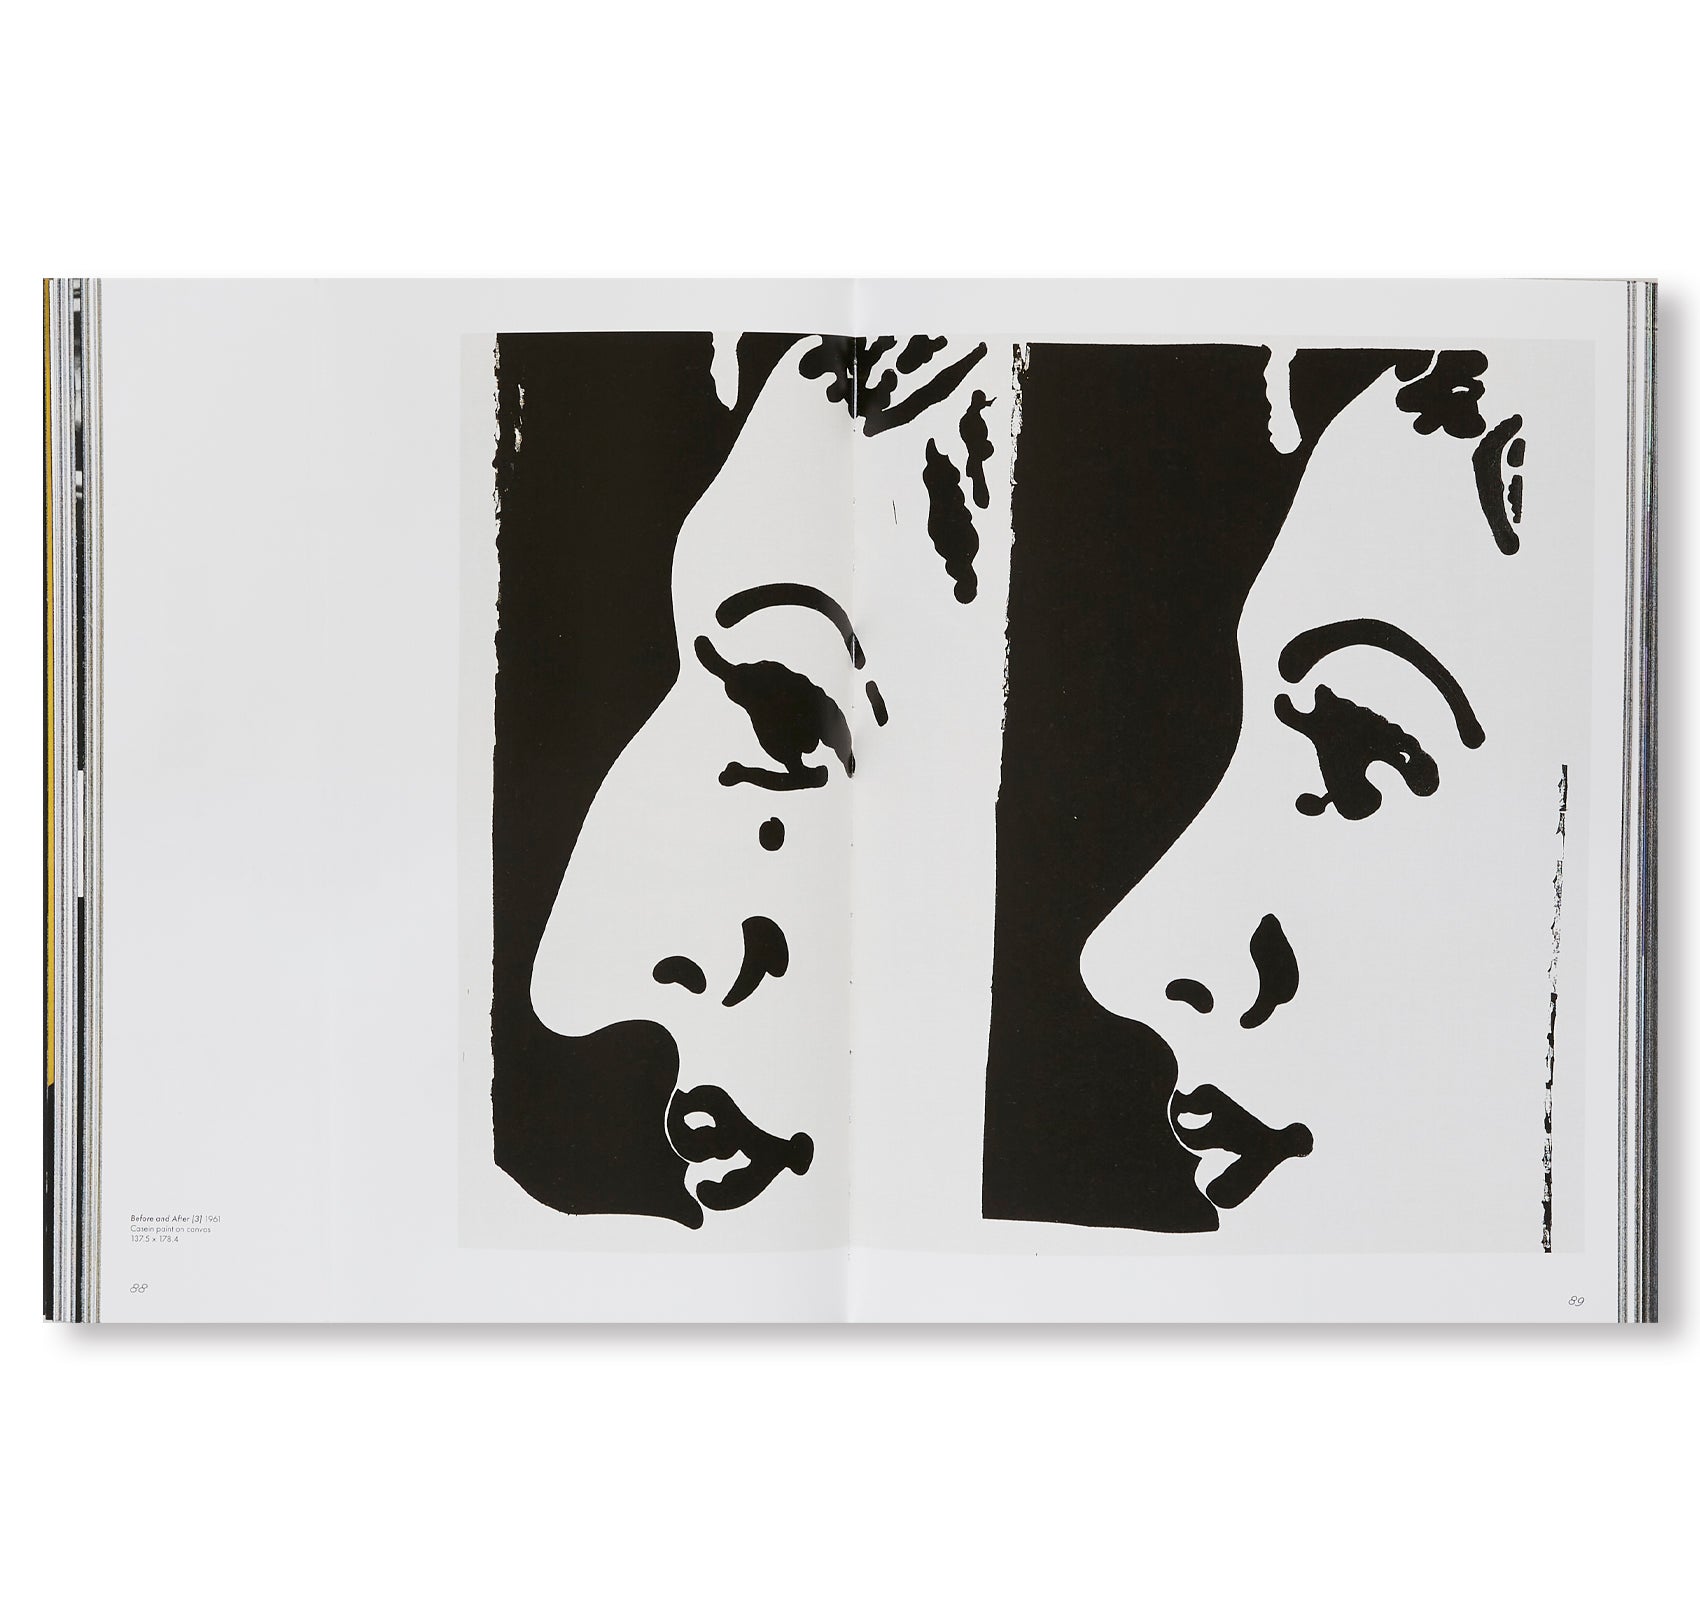 ANDY WARHOL by Andy Warhol [SOFTCOVER]